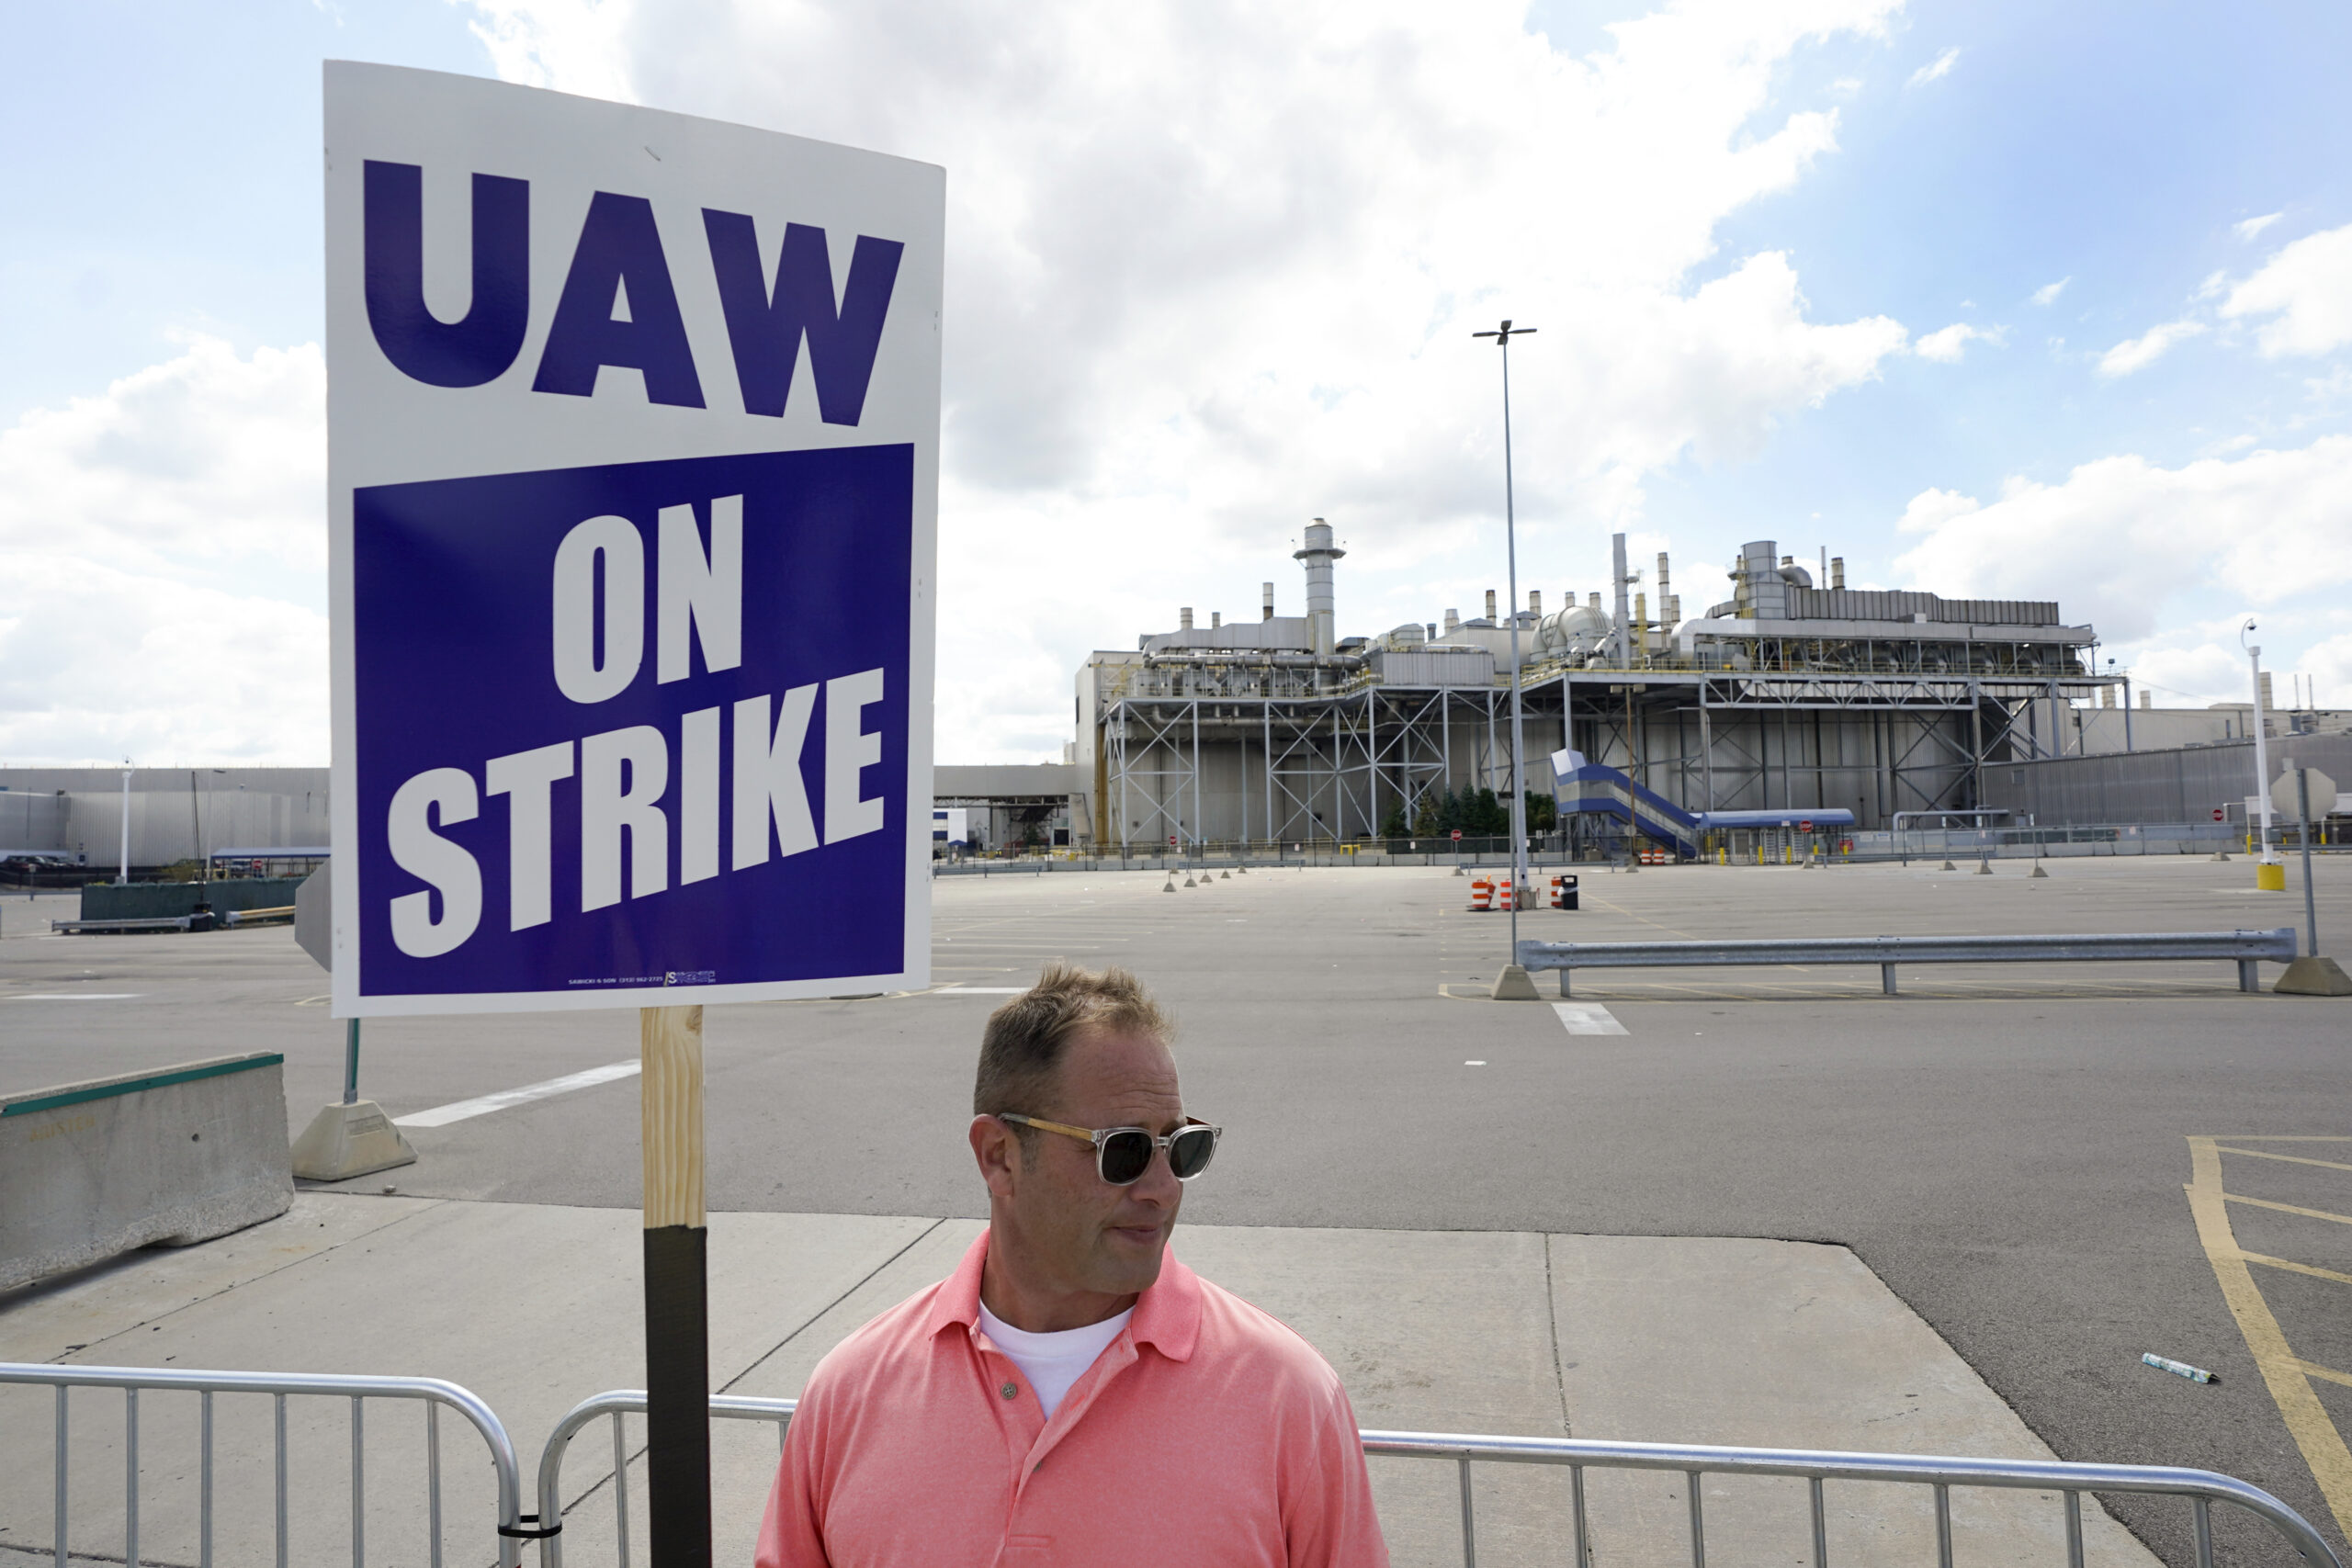 One potential strategy for Elon Musk to come out on top in the UAW strike.